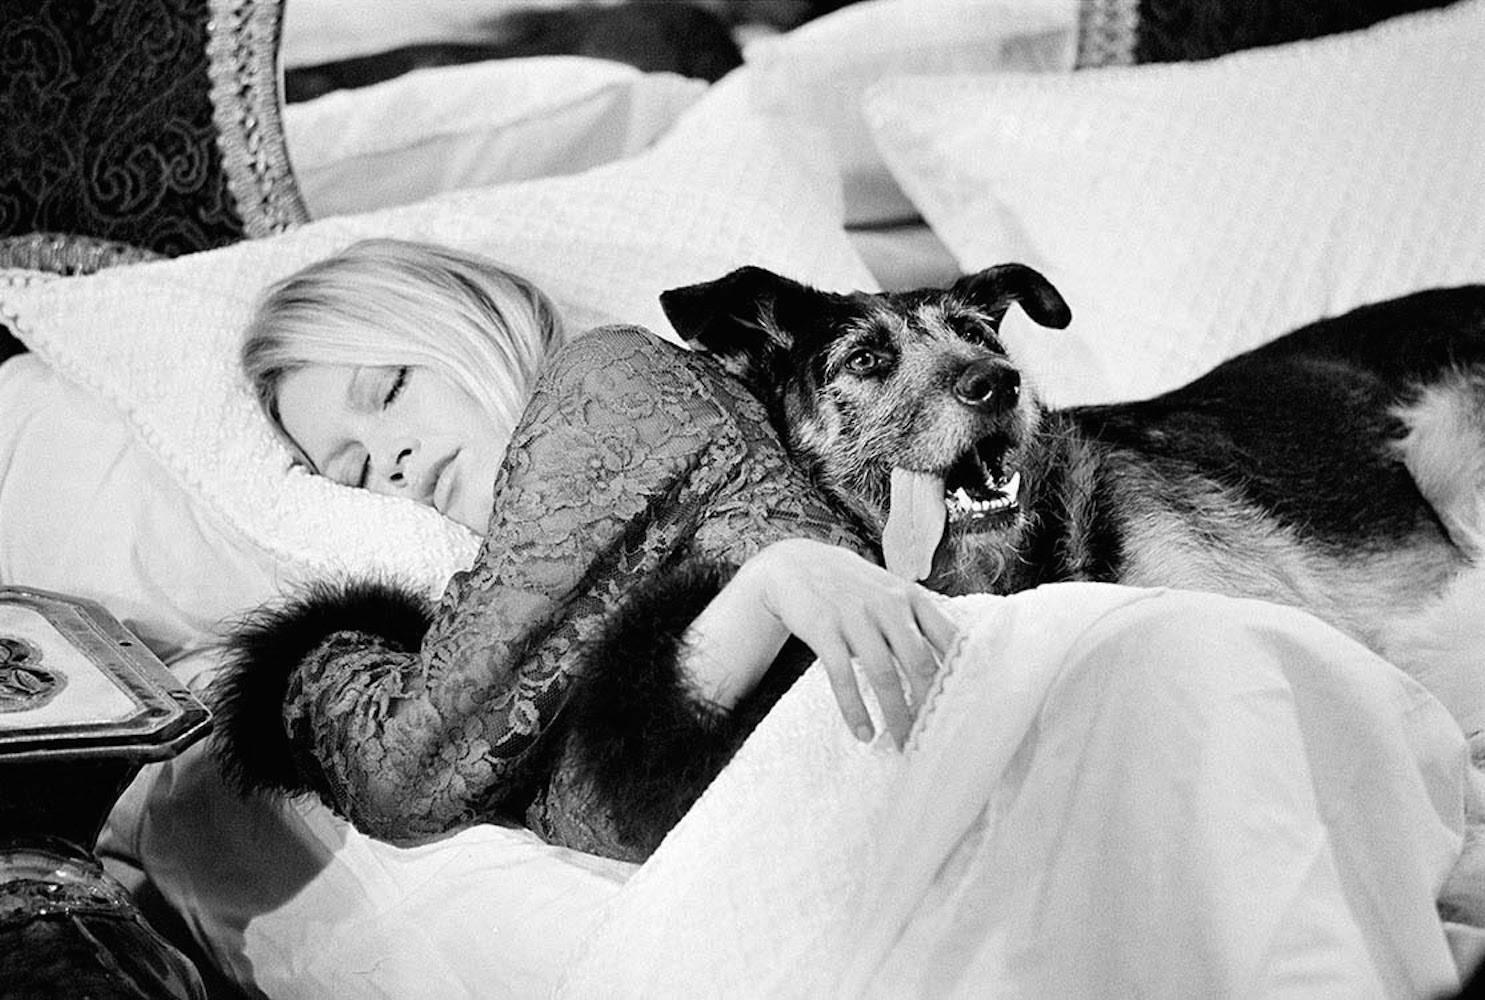 Terry O'Neill - Bardot with Dog, on set of Les Novices, Photography 1970